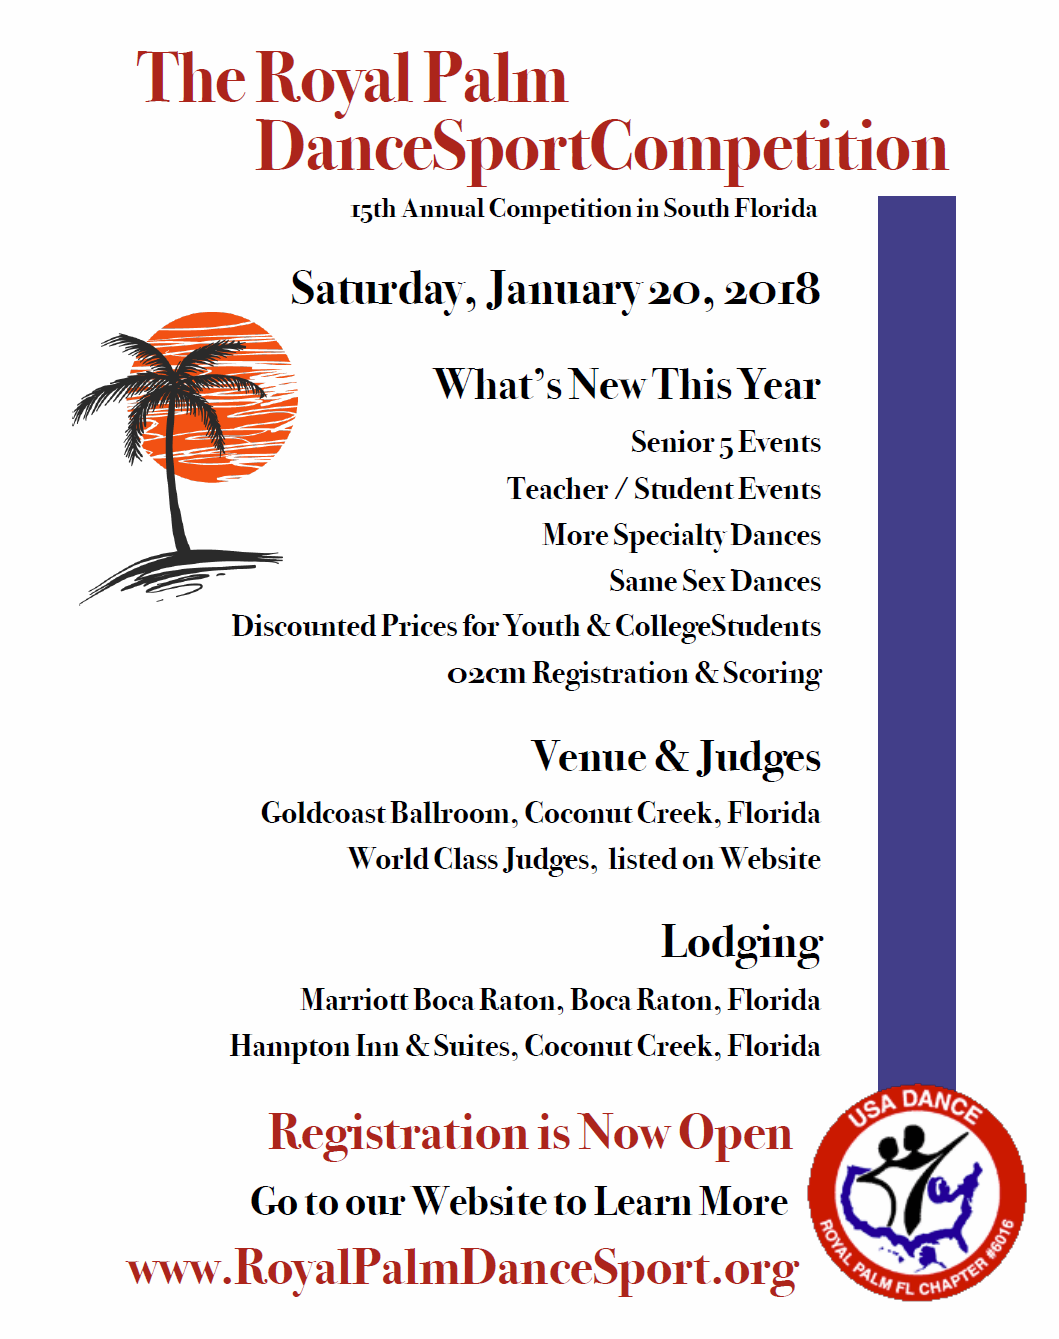 New at the 2018 Royal Palm Dancesport Competition